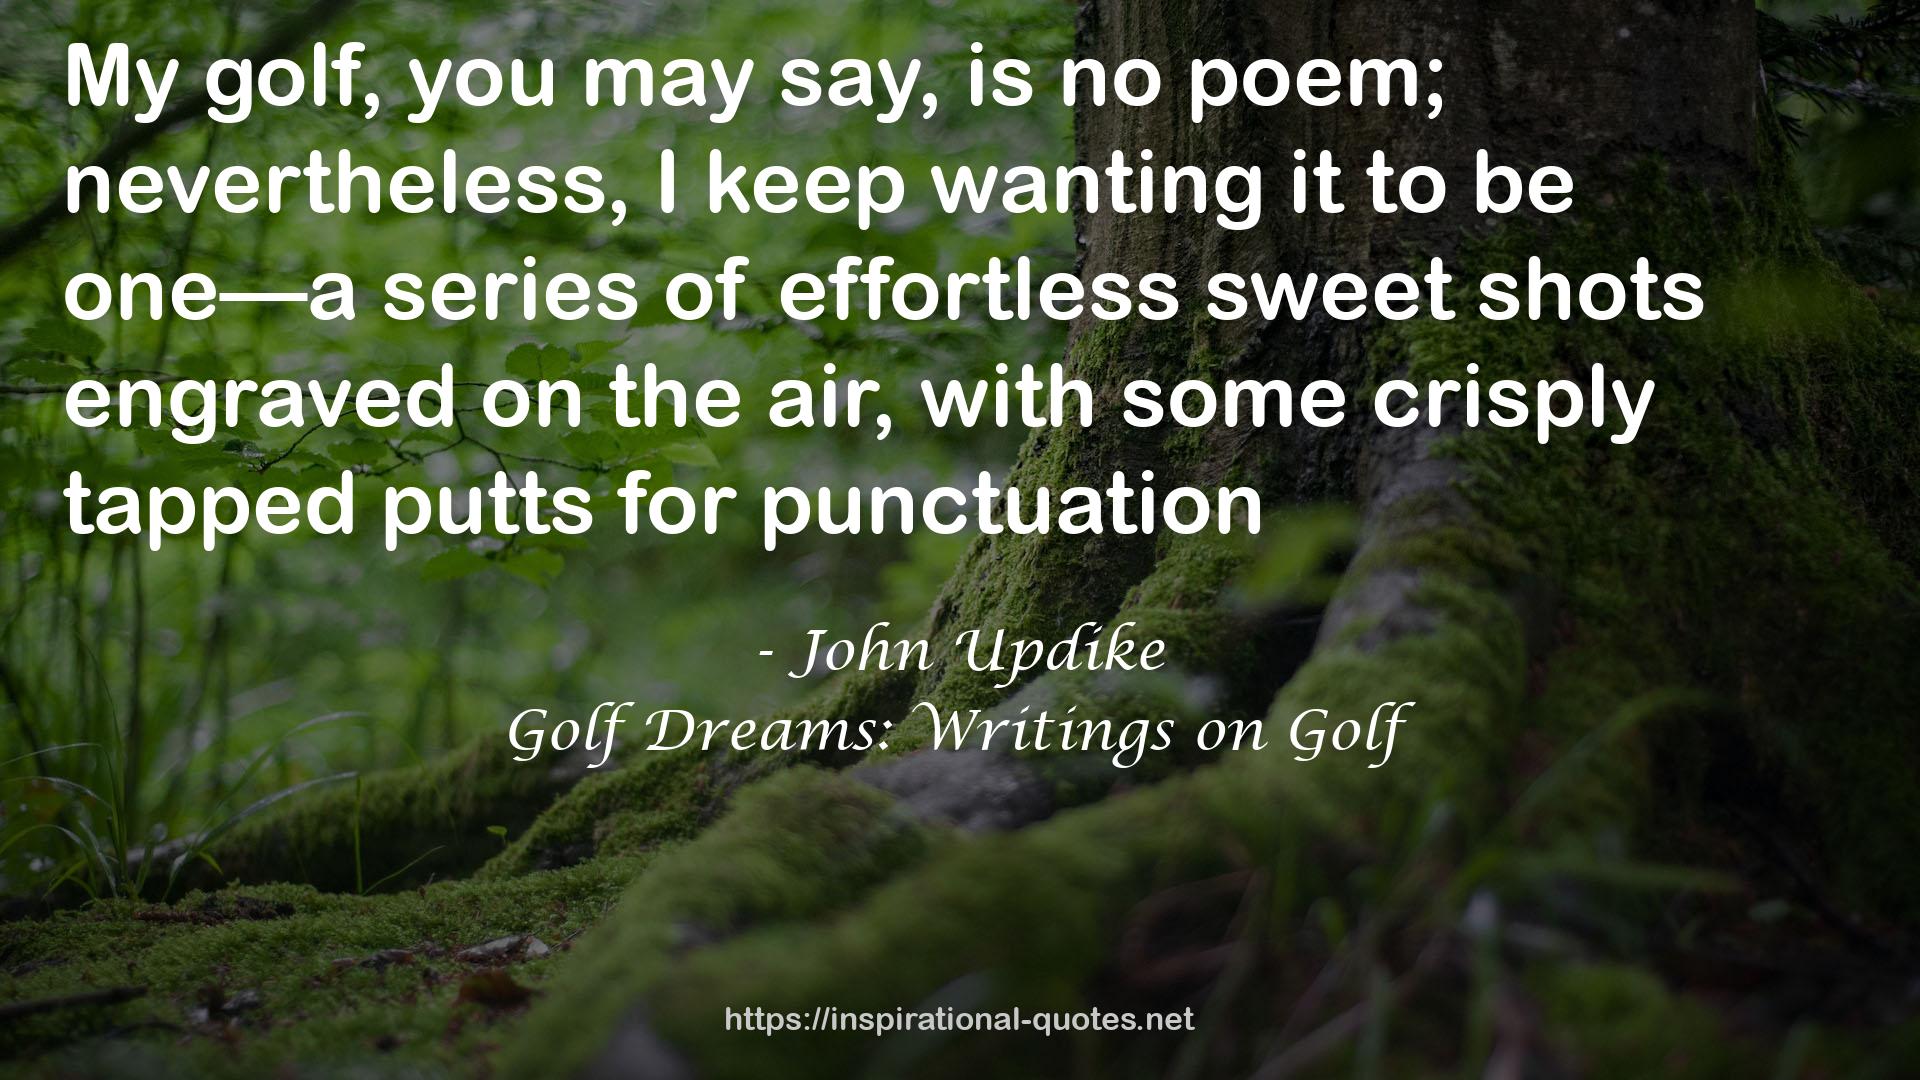 Golf Dreams: Writings on Golf QUOTES